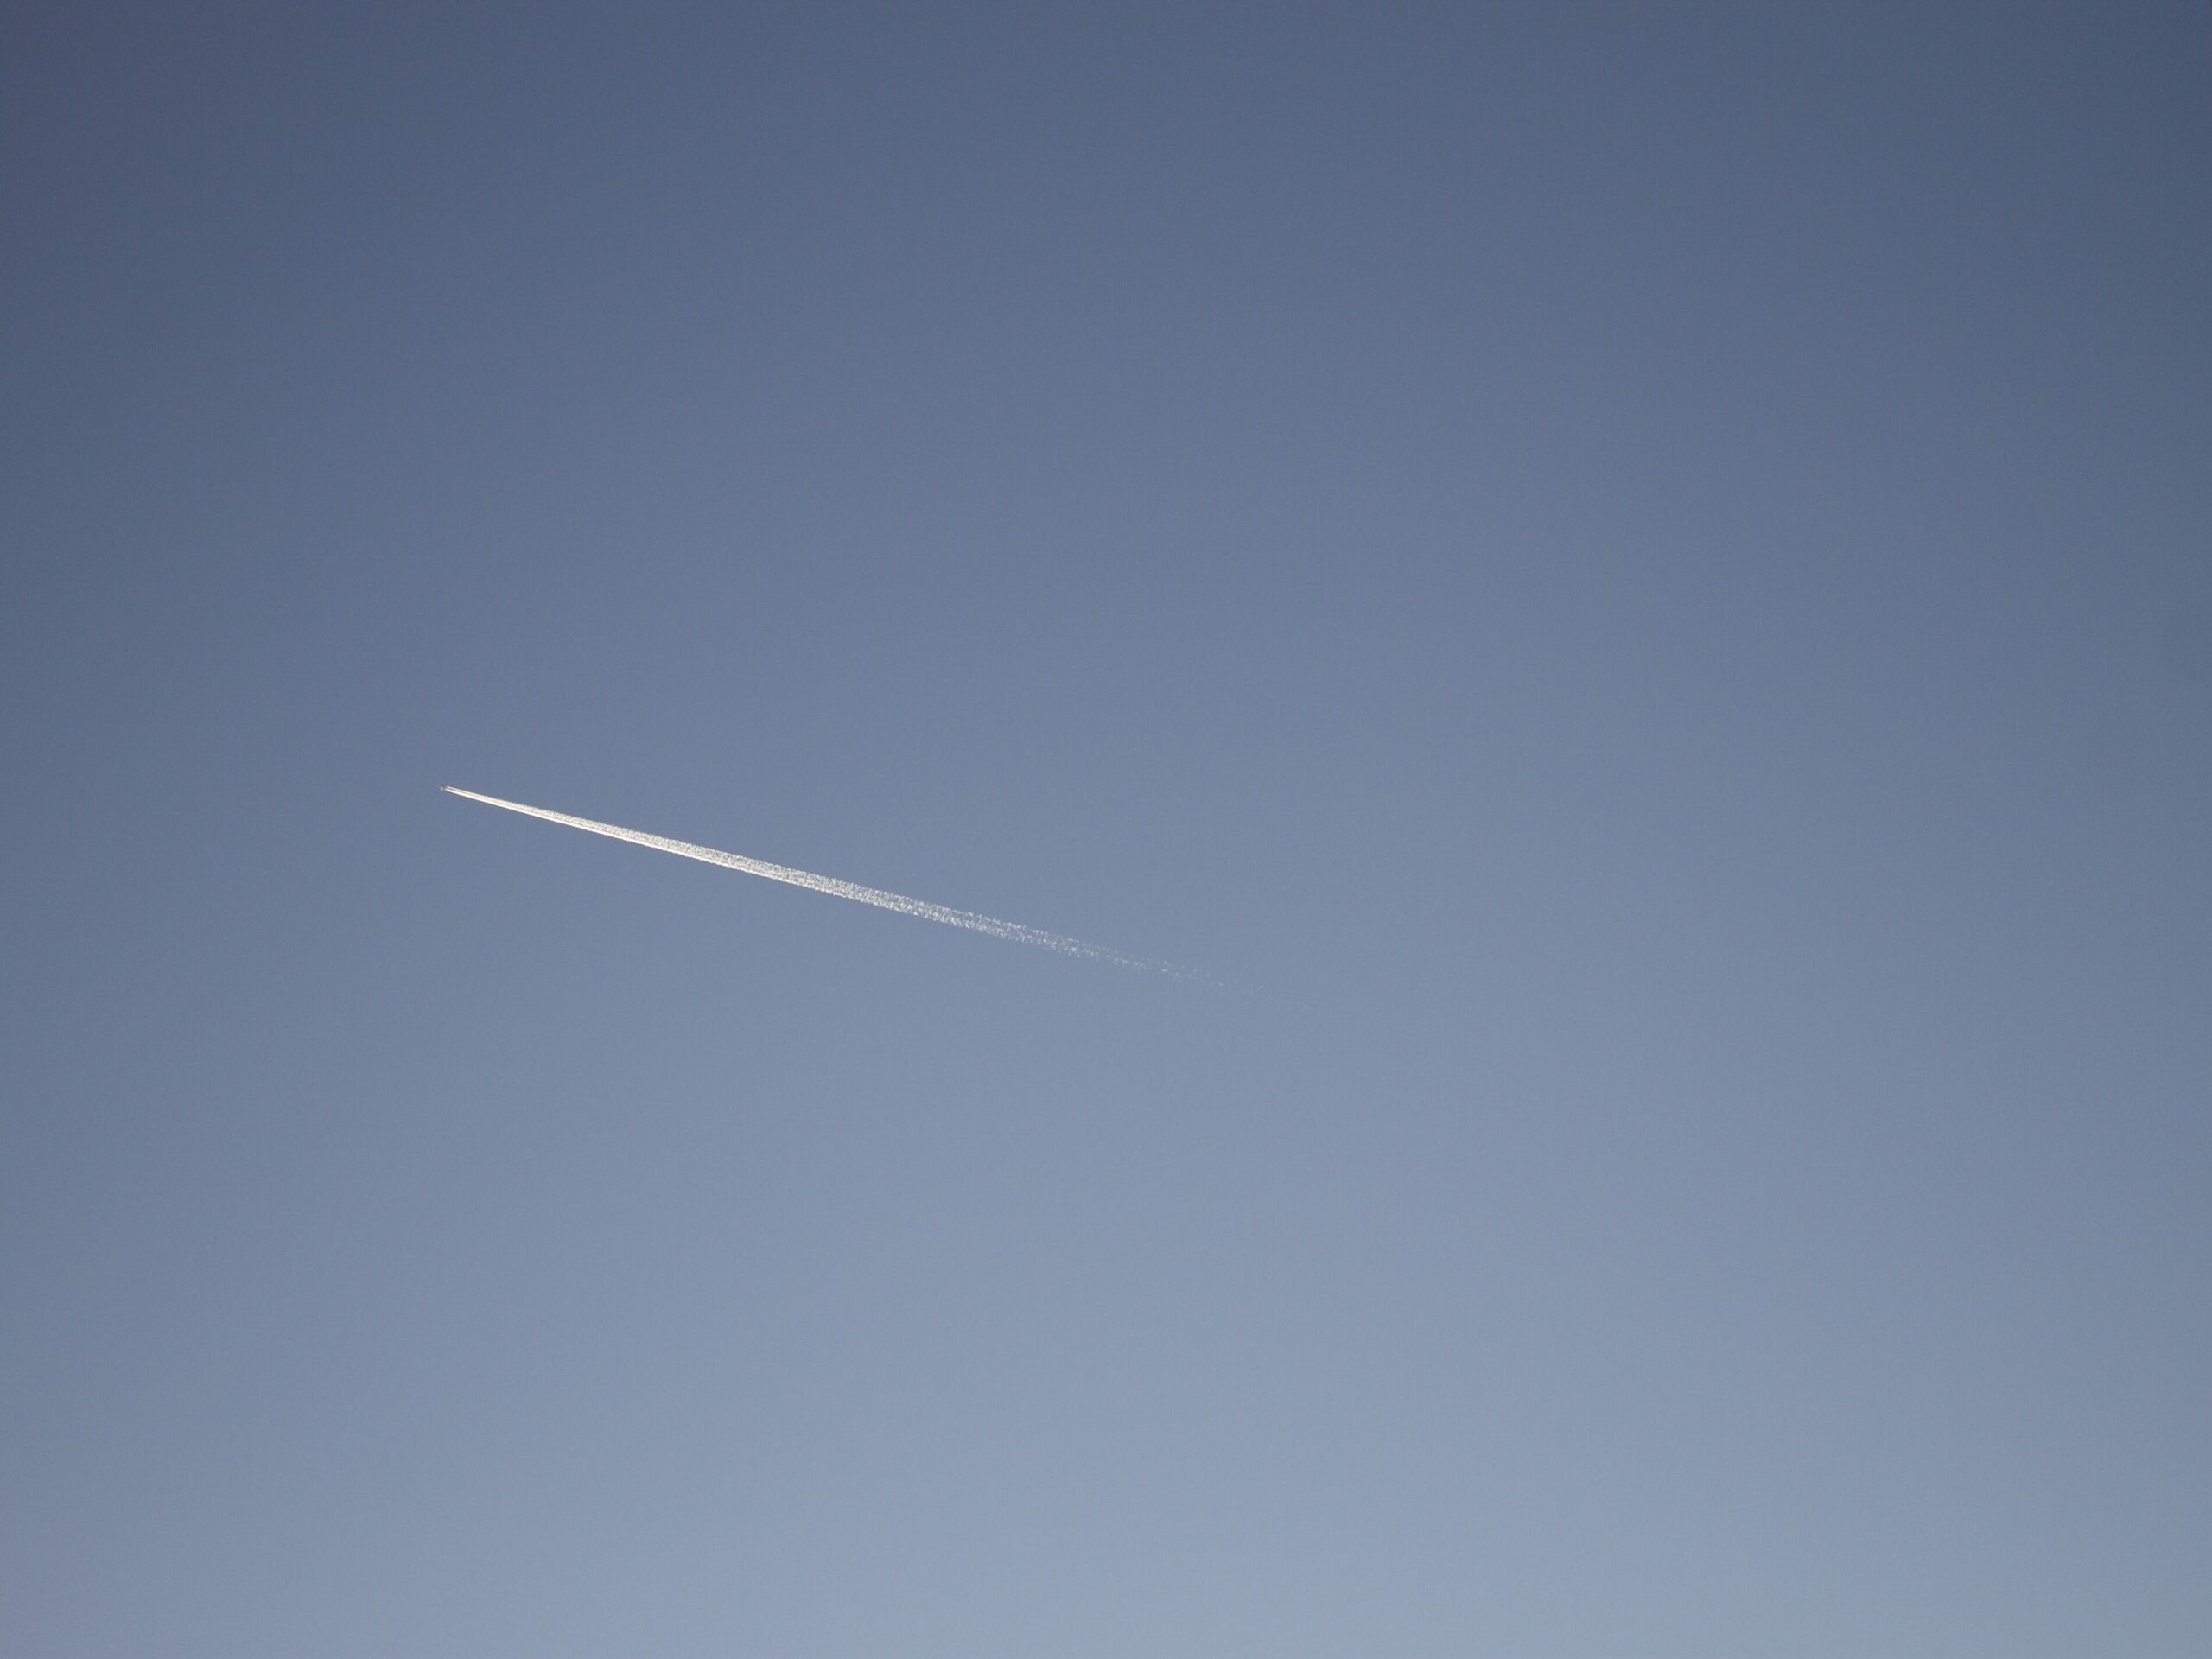 blue sky with an airplane jet fule tracks